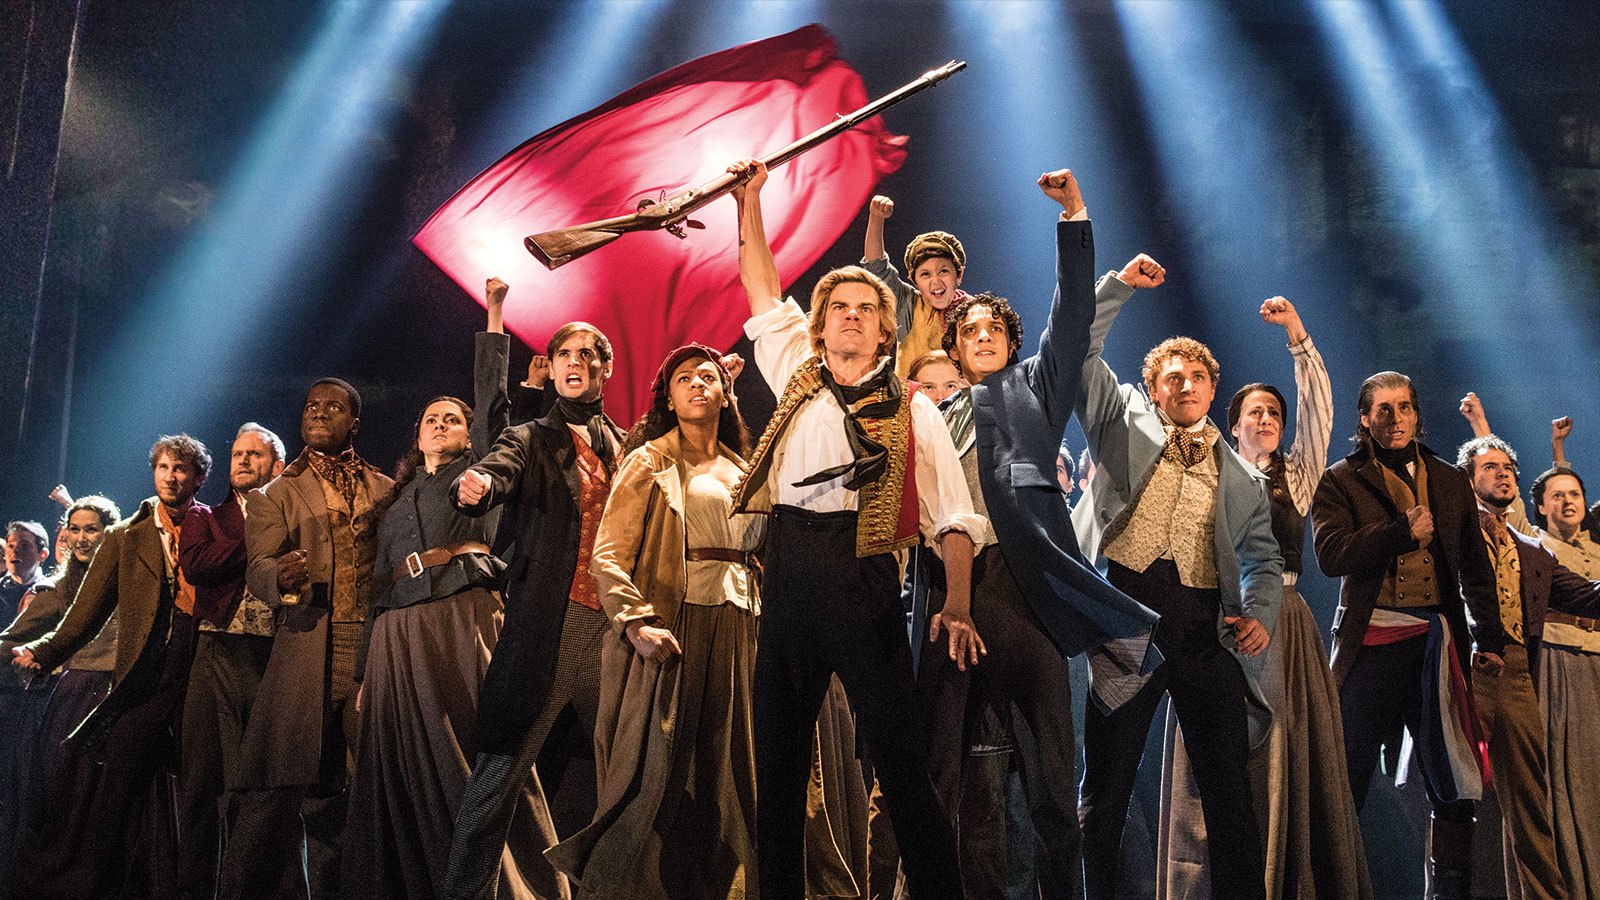 90% Of People Will Fail This General Knowledge Quiz. Will You? Les Misérables